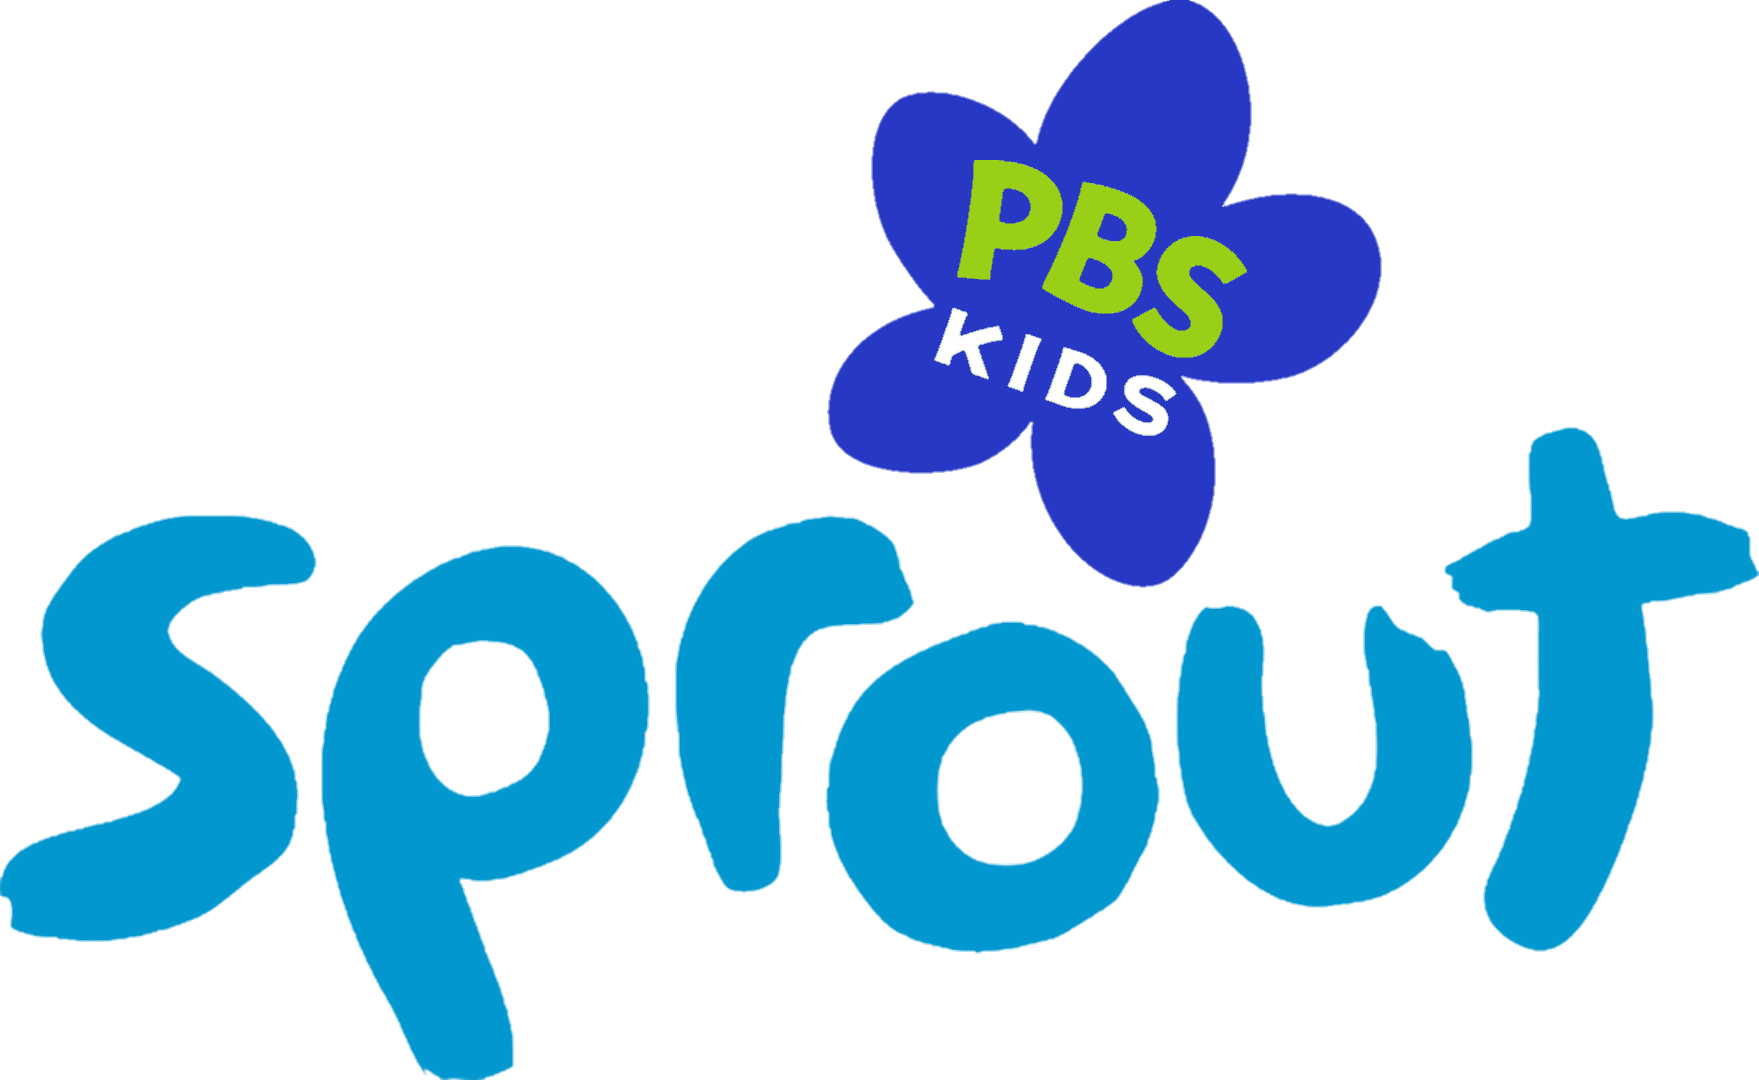 PBS KIDS Launches First Tablet Featuring Educational Content and